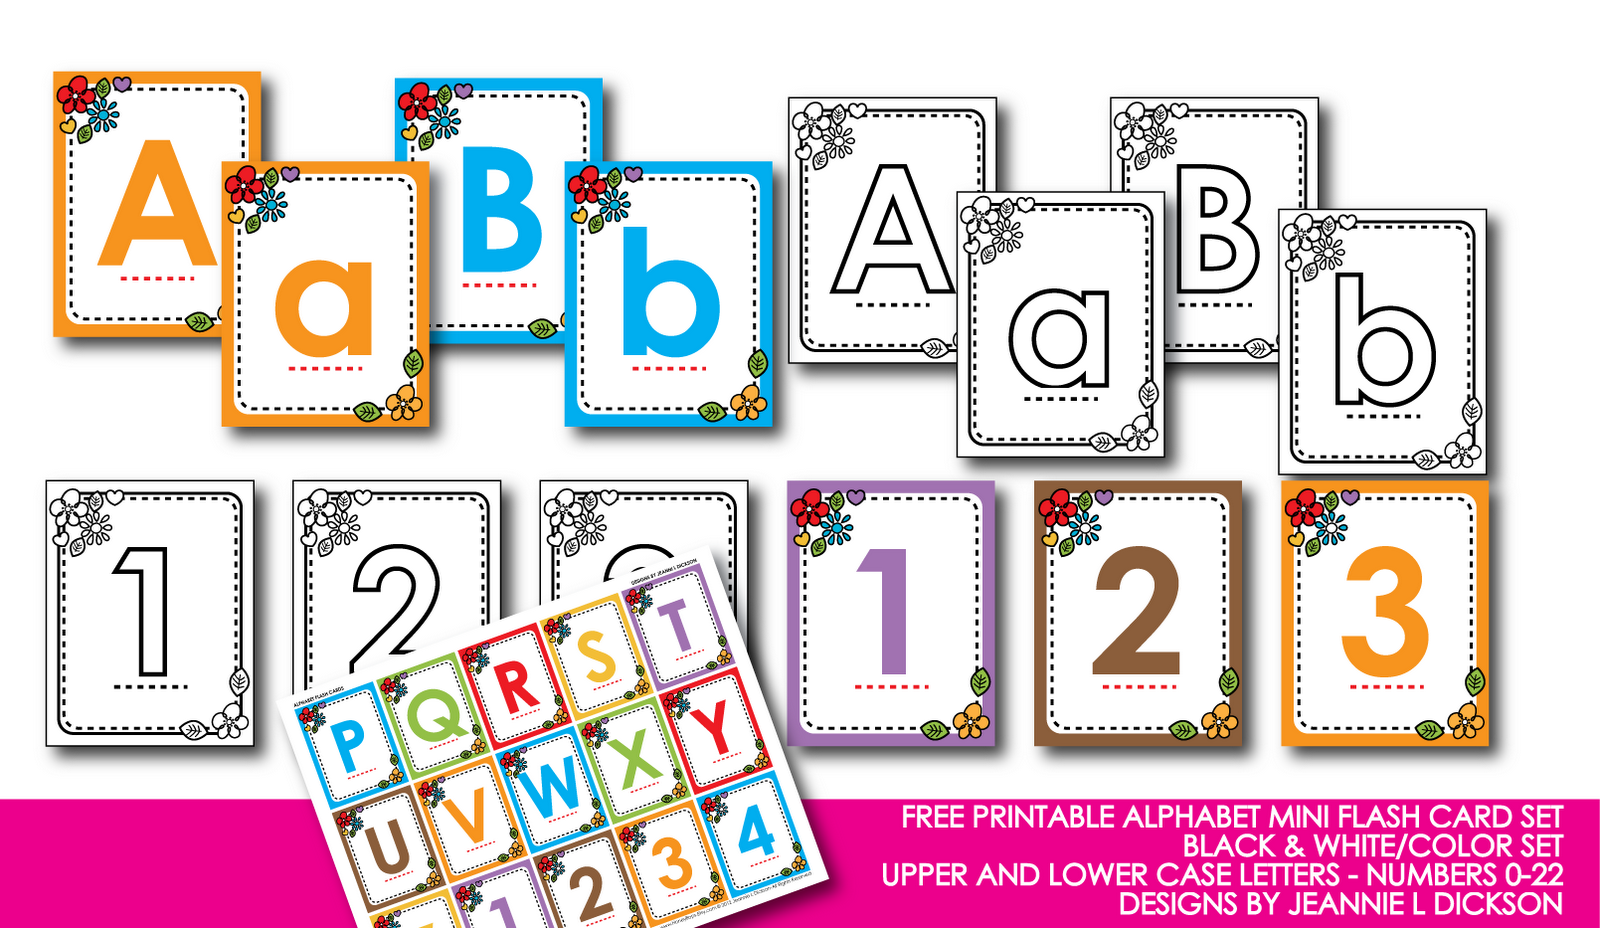 6-best-images-of-free-printable-the-whole-flash-cards-alphabet-preschool-free-printable